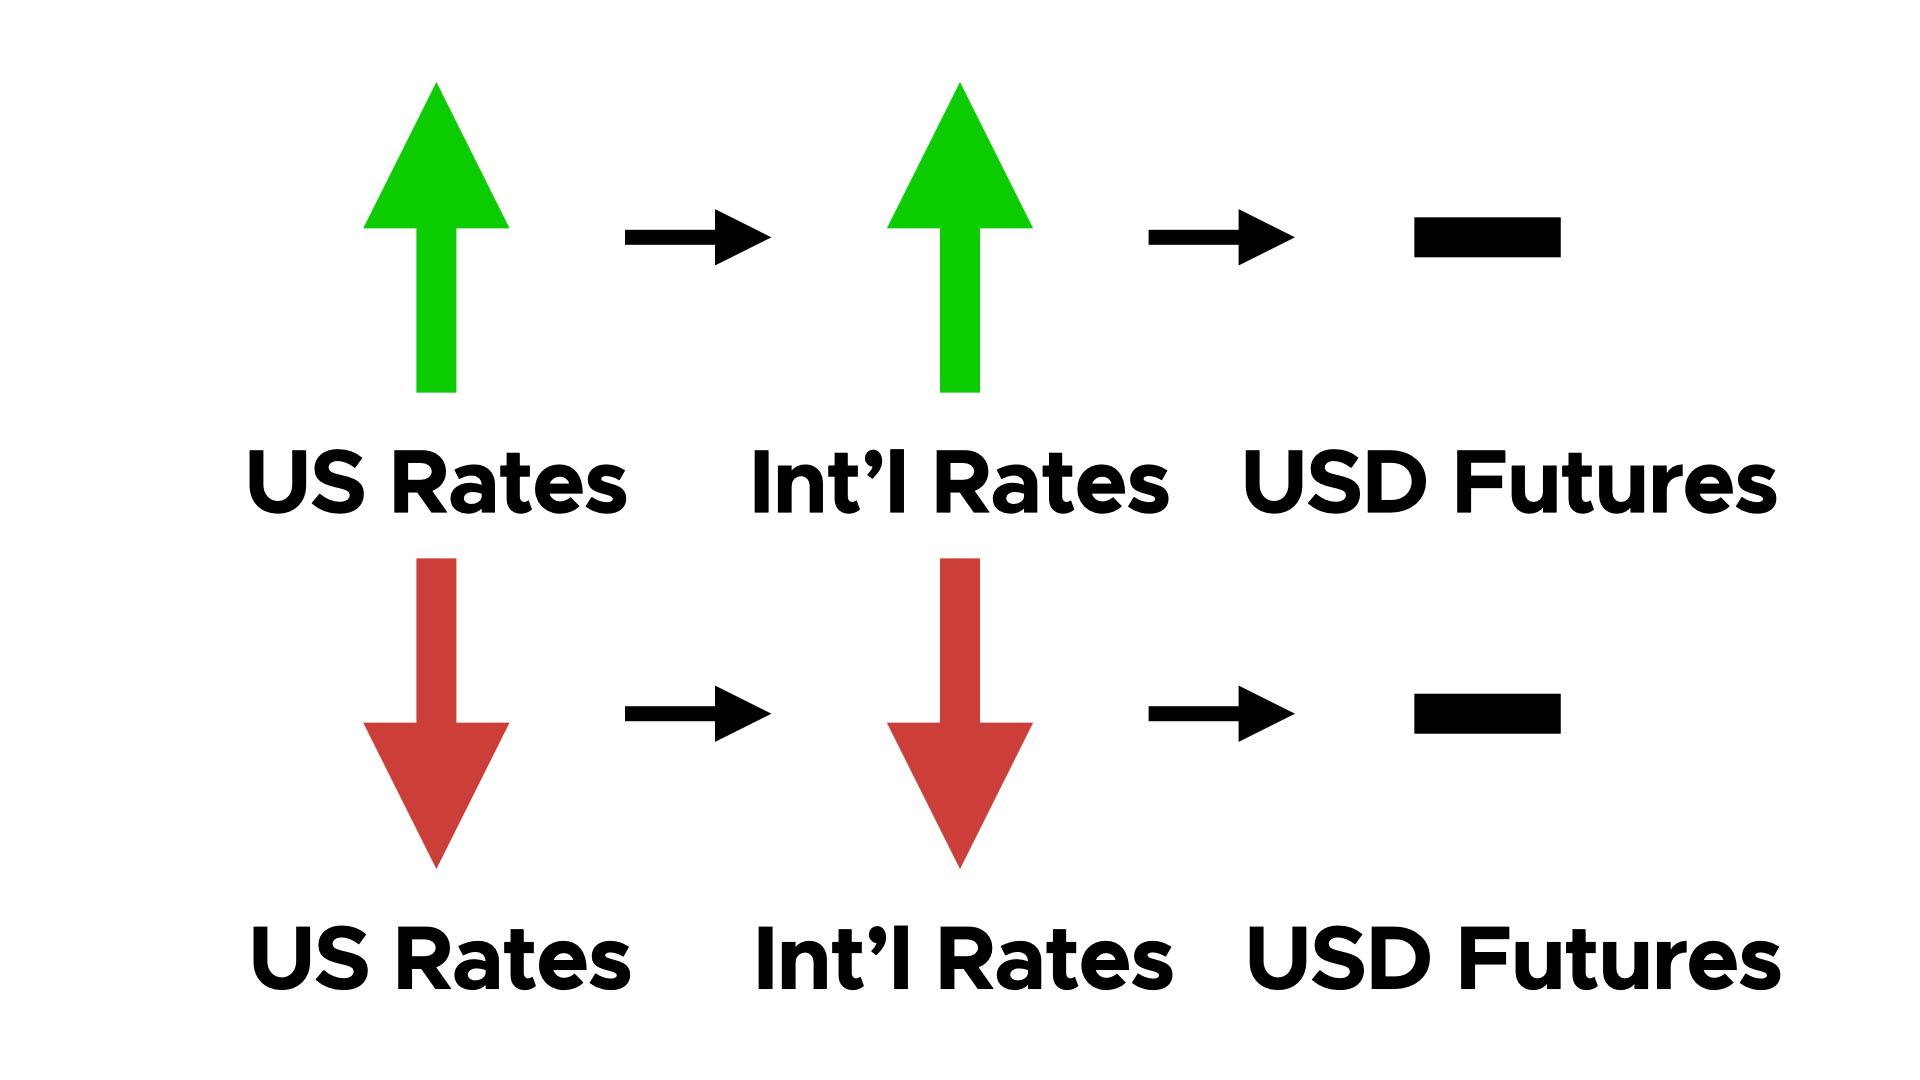 How do Changes in Interest Rates Affect Currency Trading? - 2